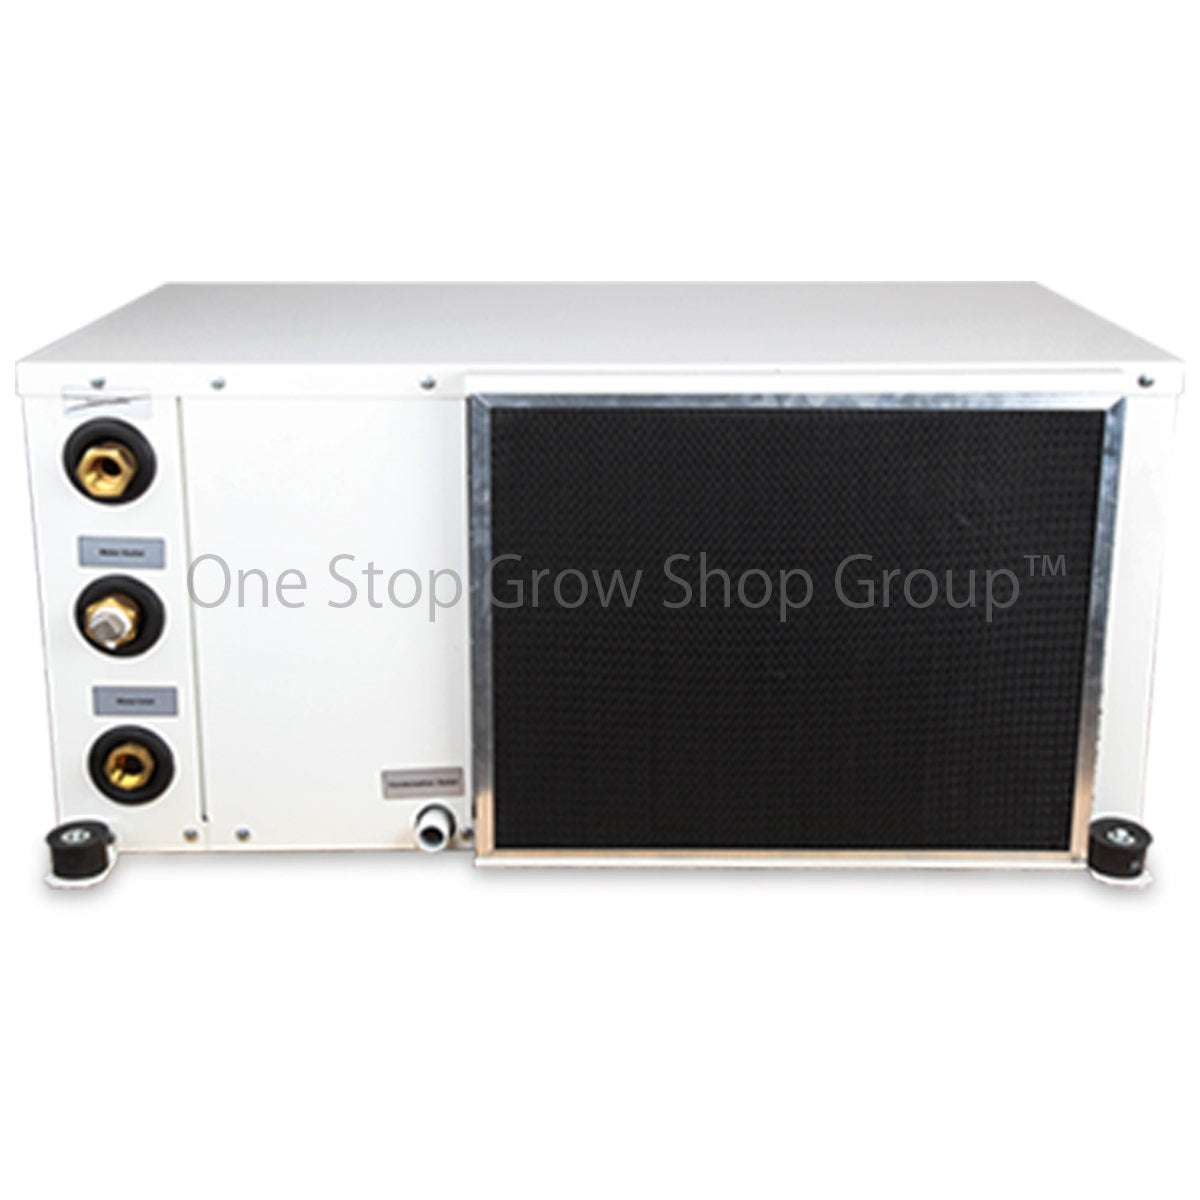 Opticlimate Pro 3 - Water-cooled Grow Room Air Conditioning Unit